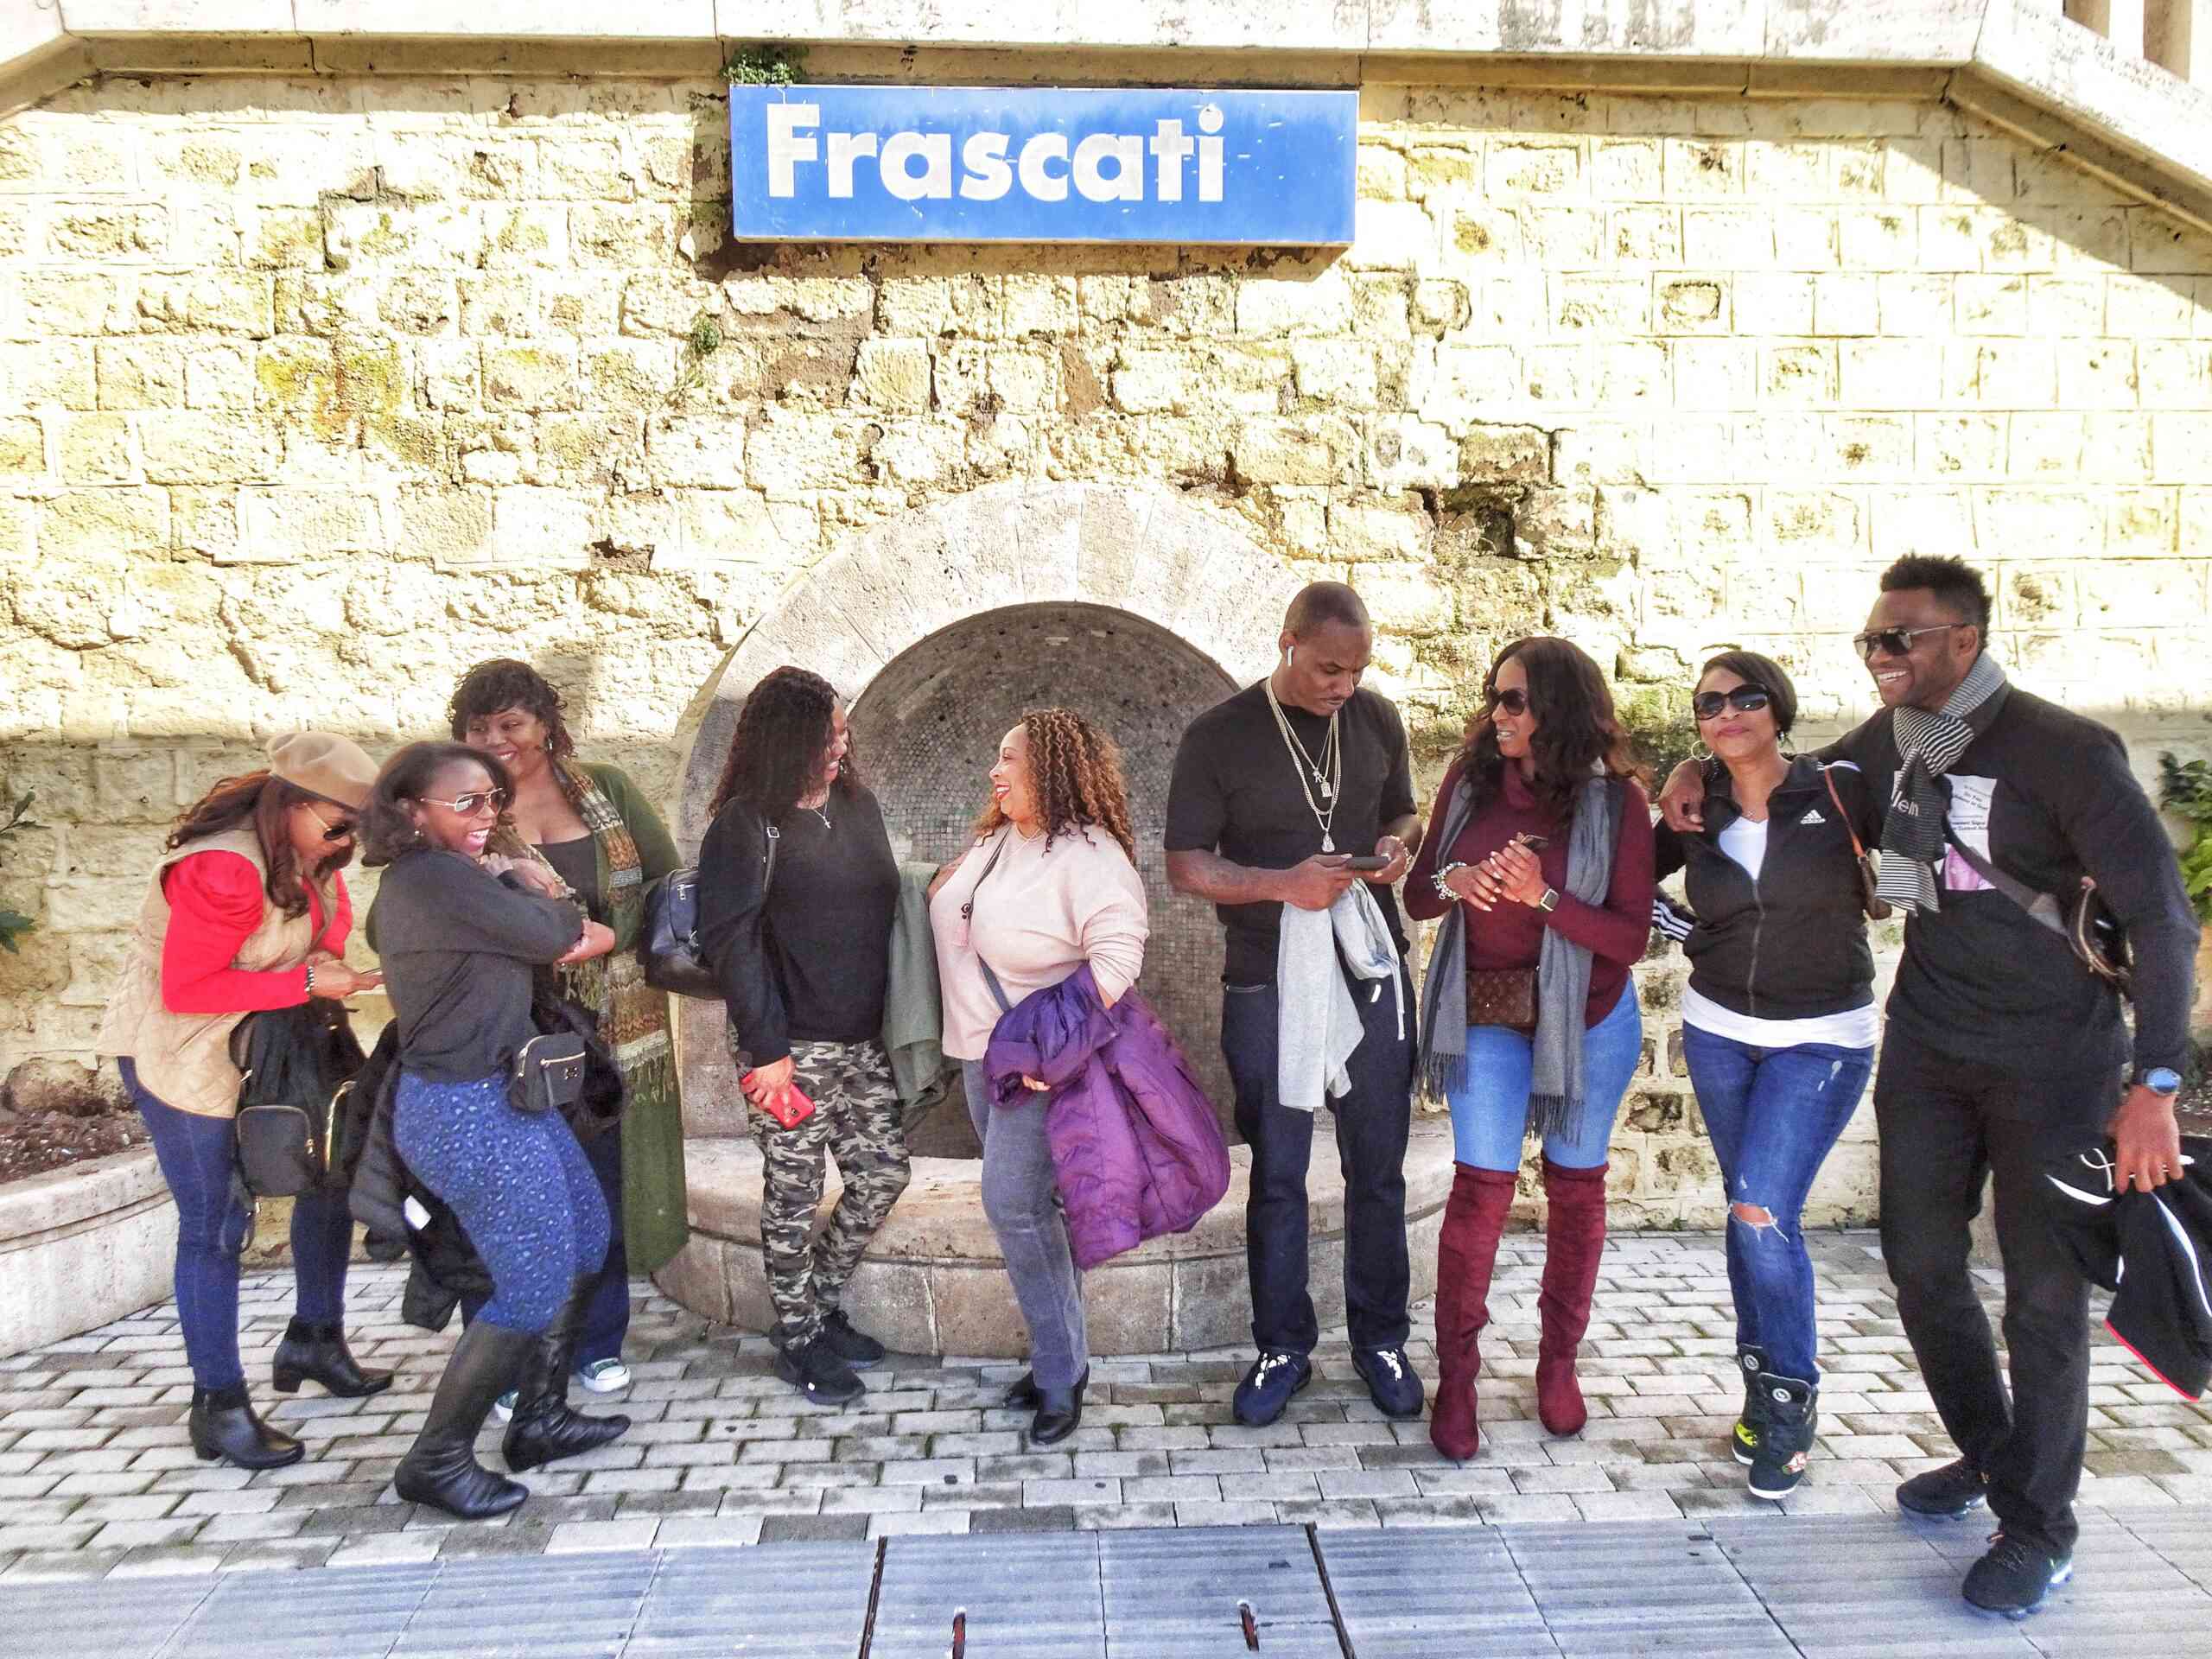 Group of people traveling in Frascati